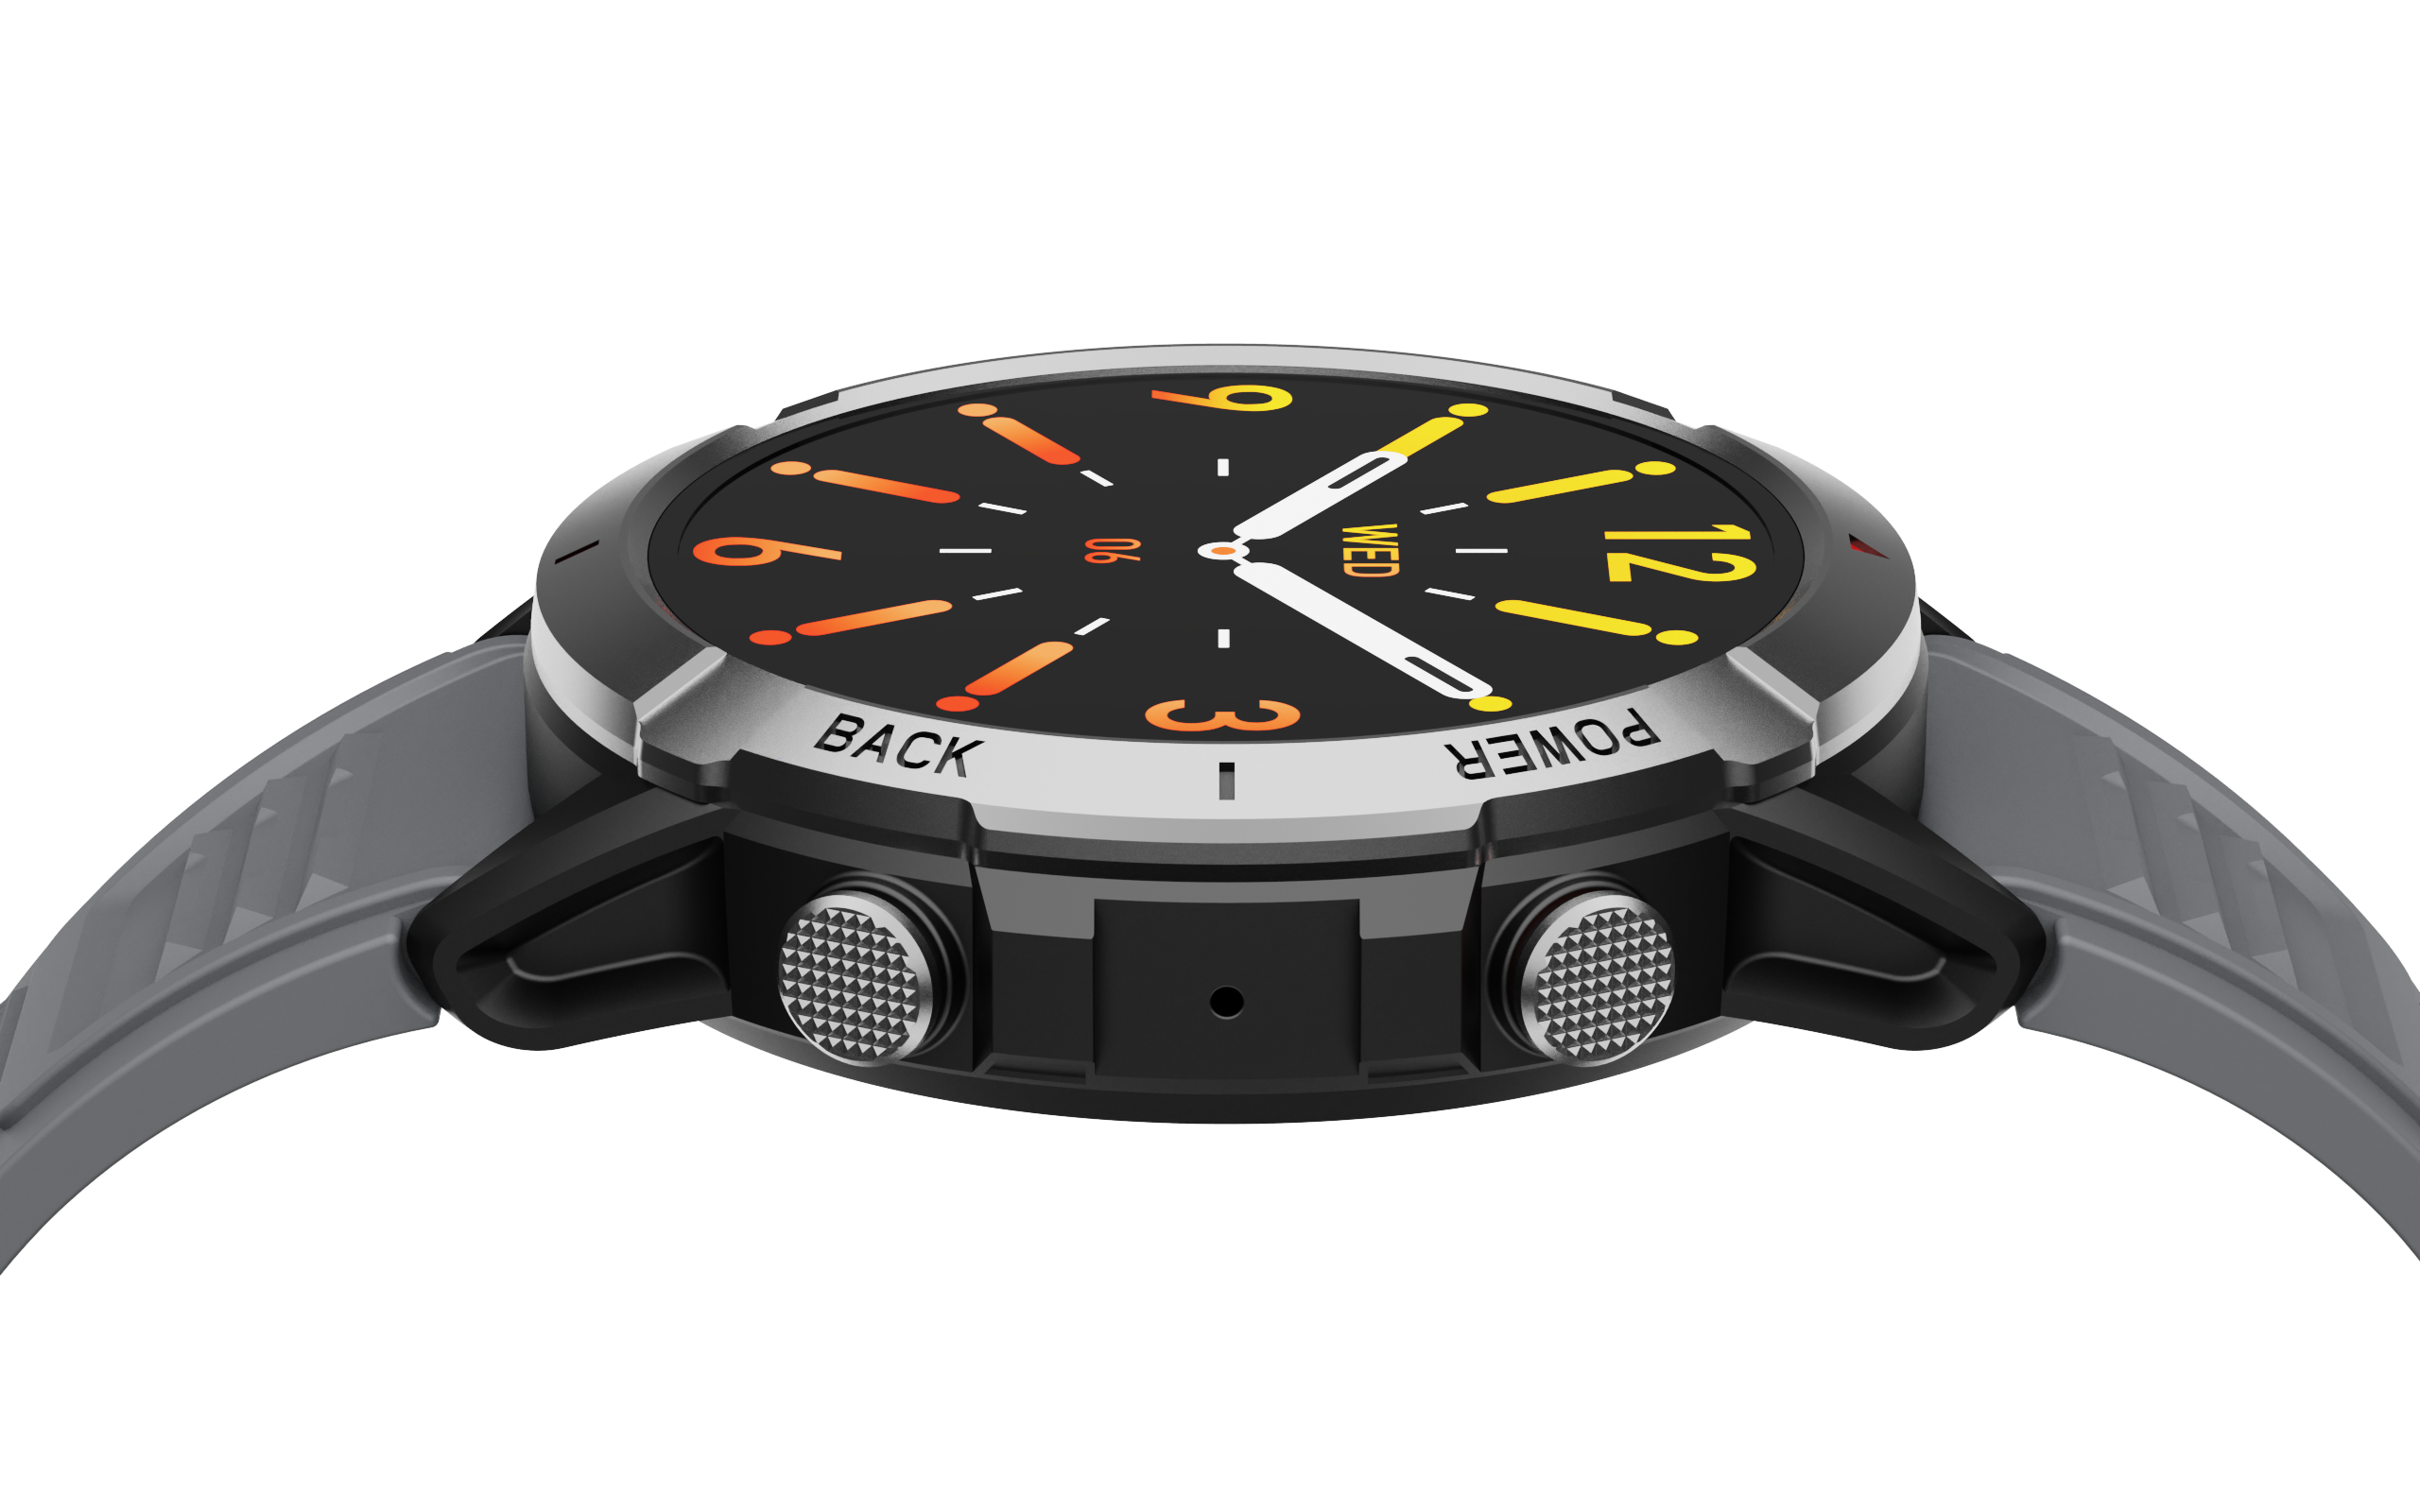 boAt Lunar Fit Bluetooth Calling Smartwatch with 1.43" AMOLED Display